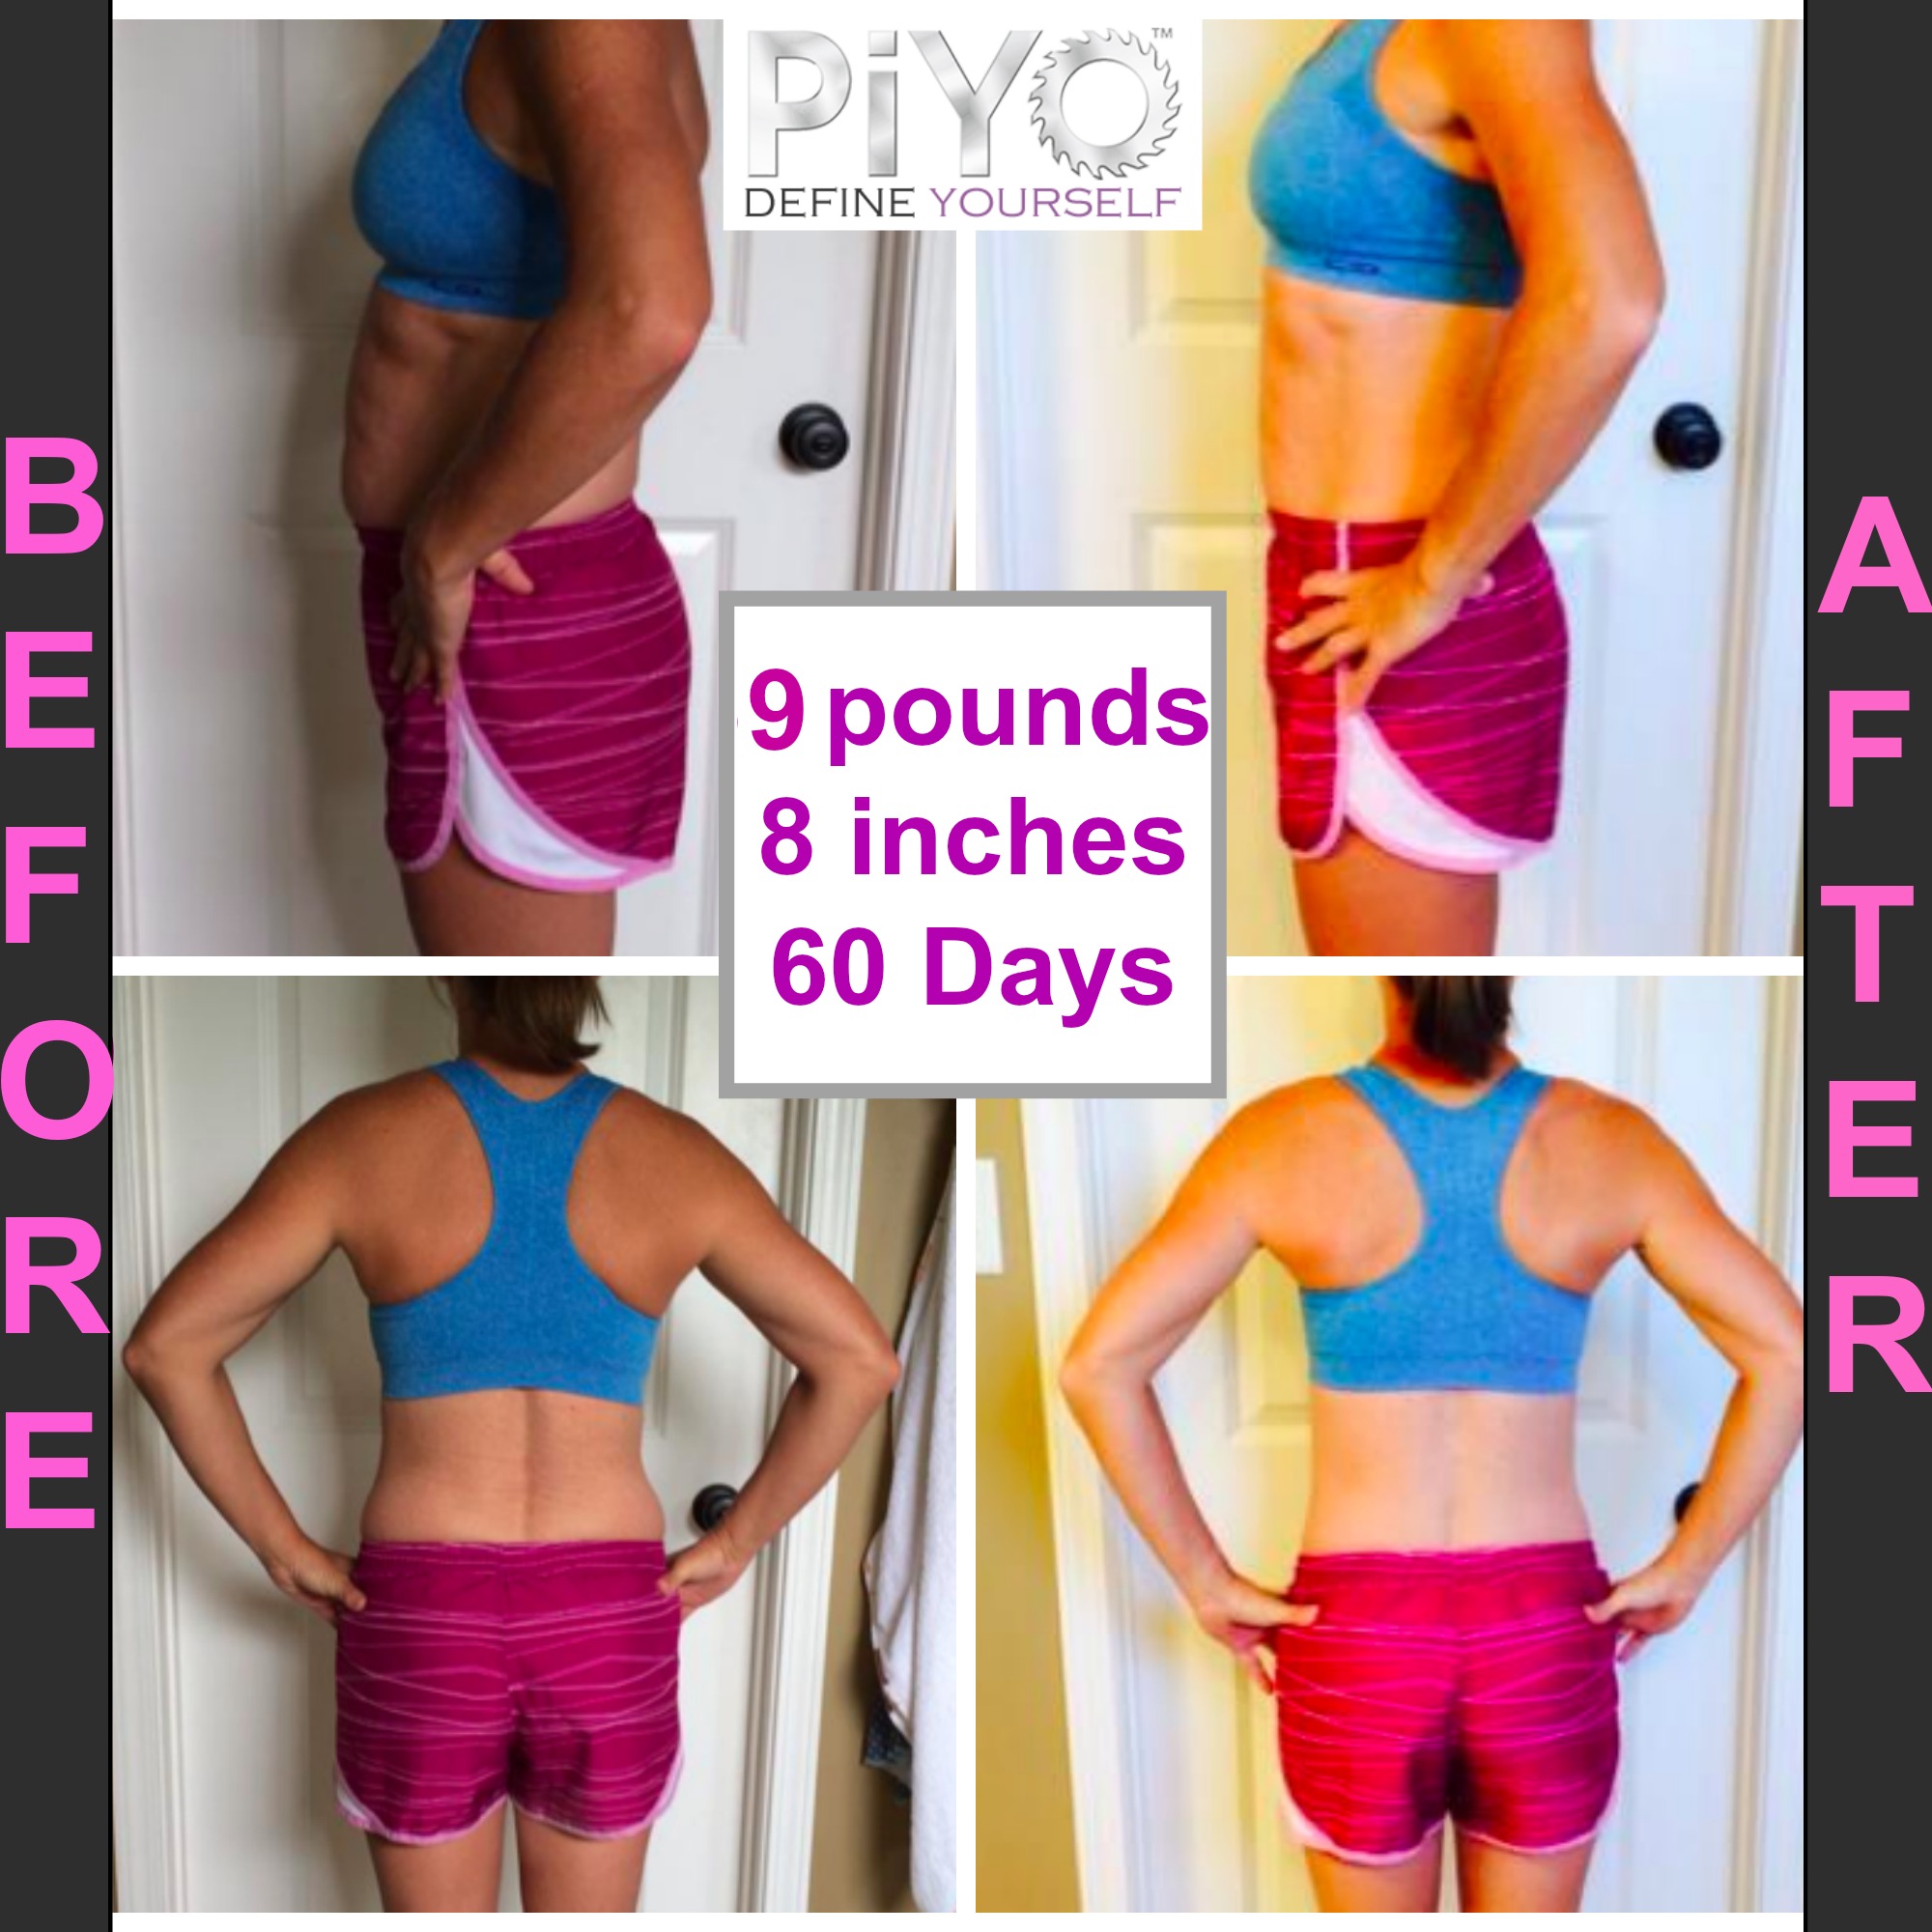 Piyo Workout Results And Review